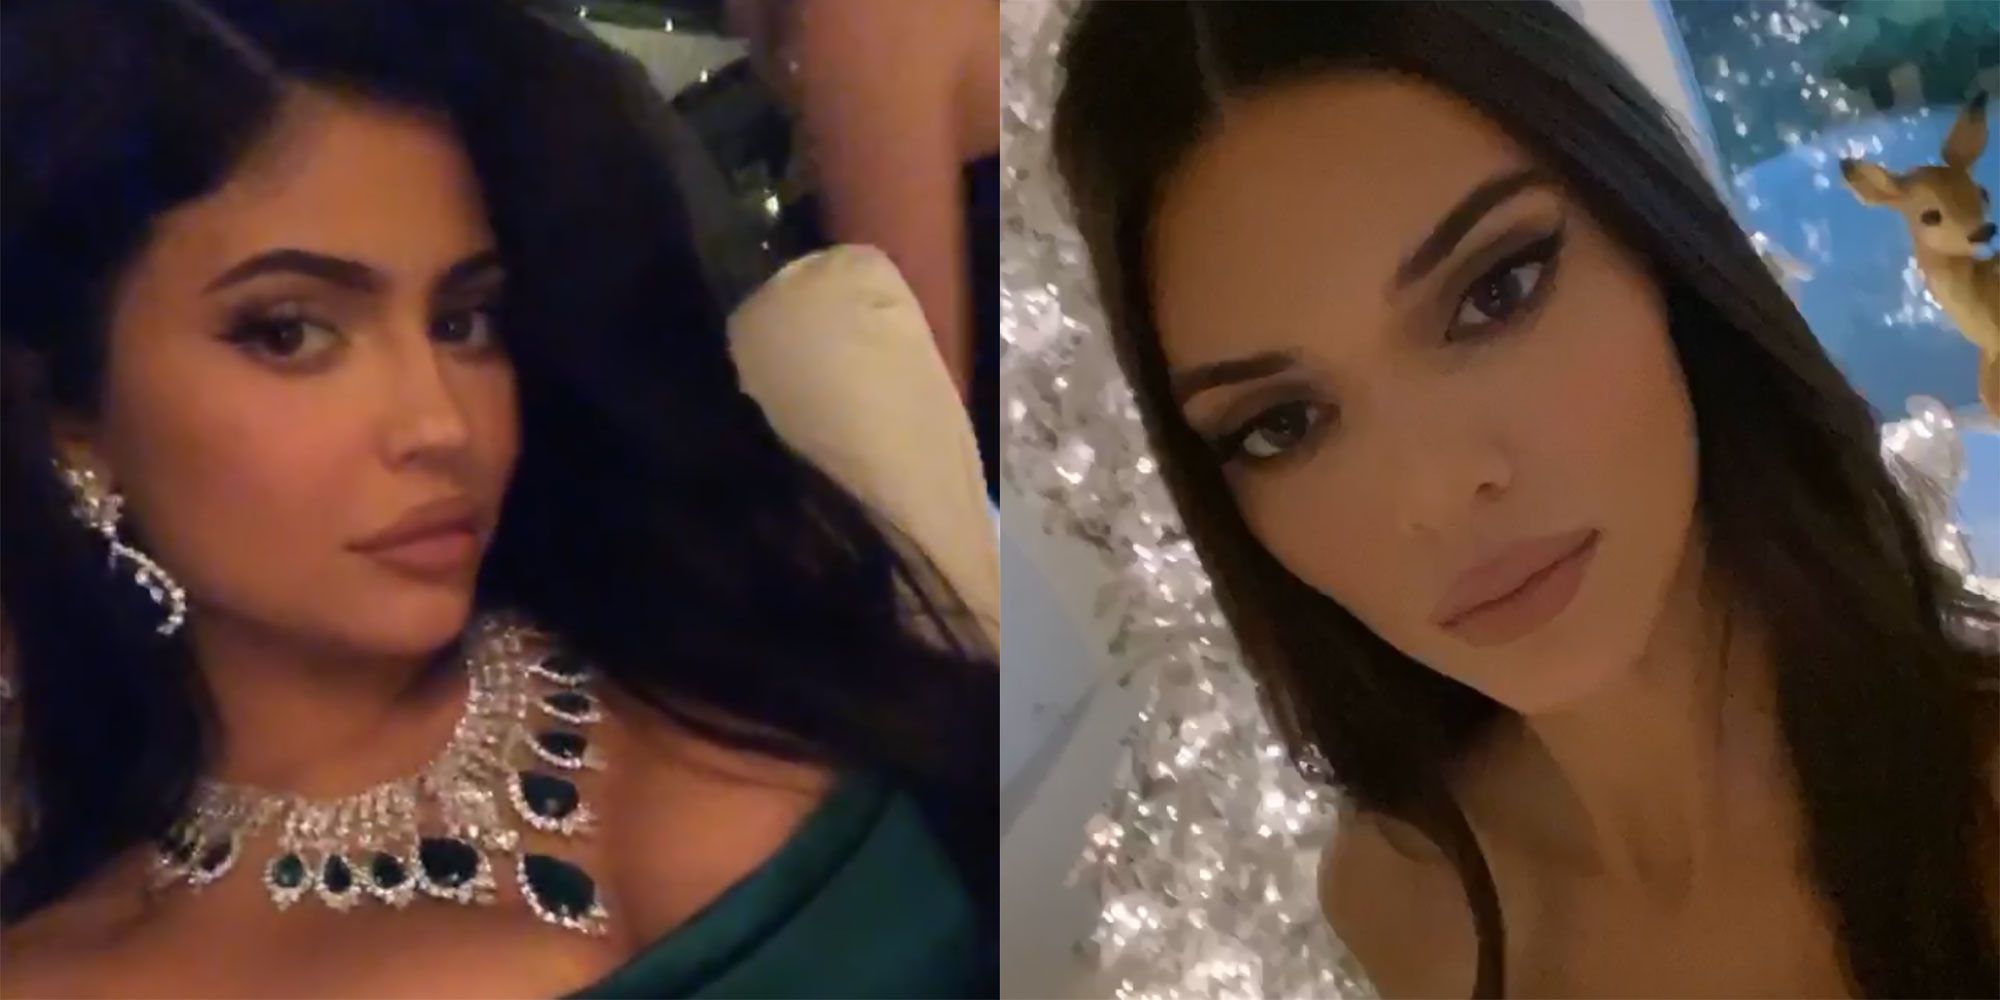 Leggy Kendall and Kylie Jenner celebrate the holidays with ANOTHER